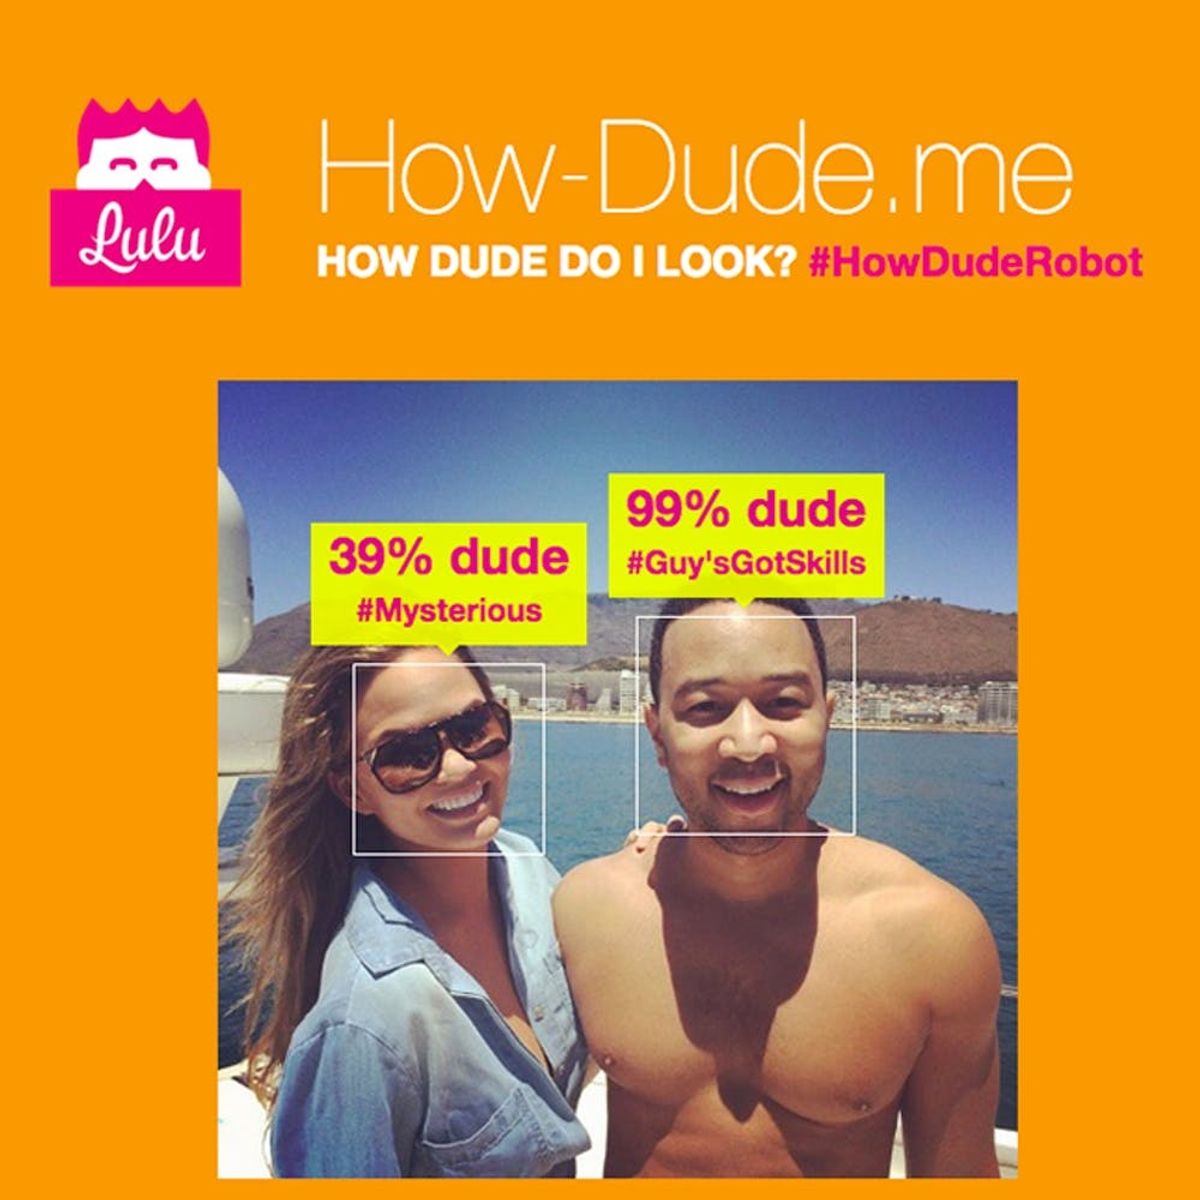 The Latest Online Time Waster Will Show You How “Dude” You Are